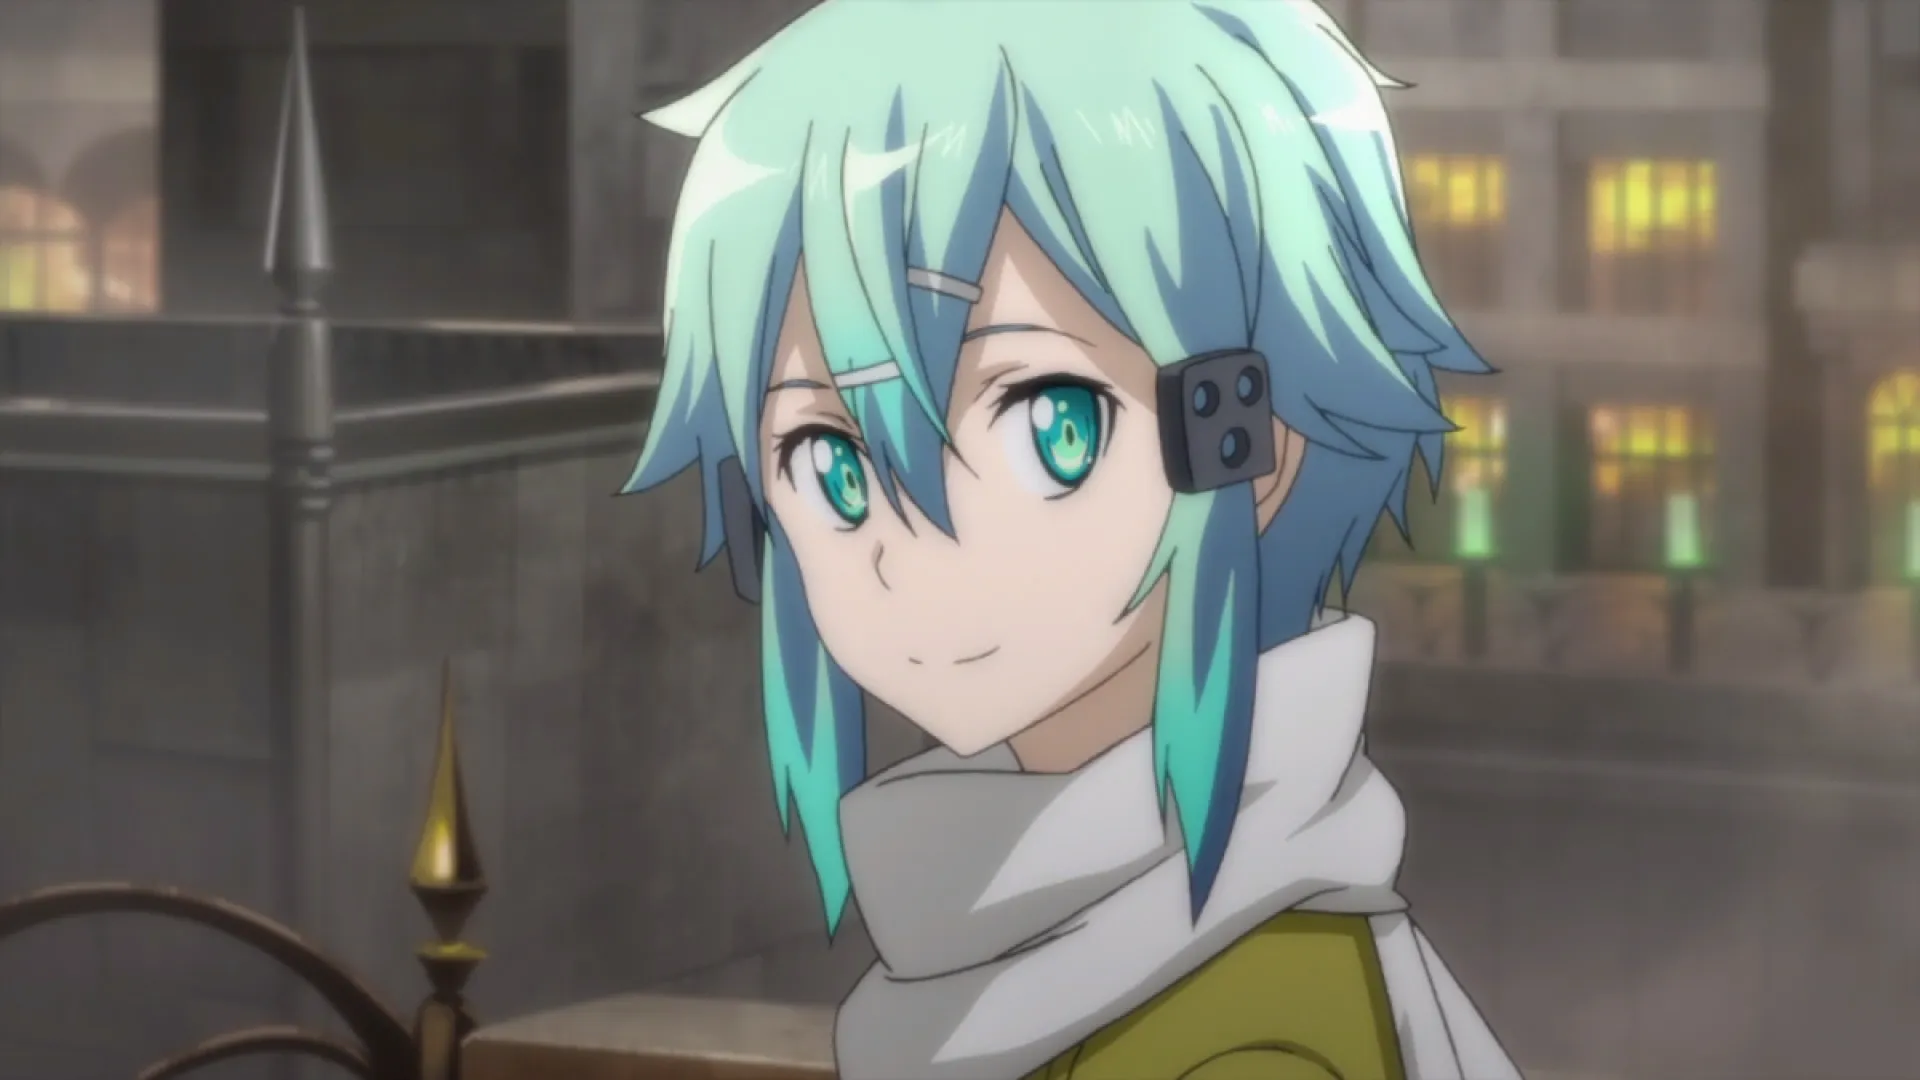 Shino from Sword Art Online smiling (A-1 Pictures)